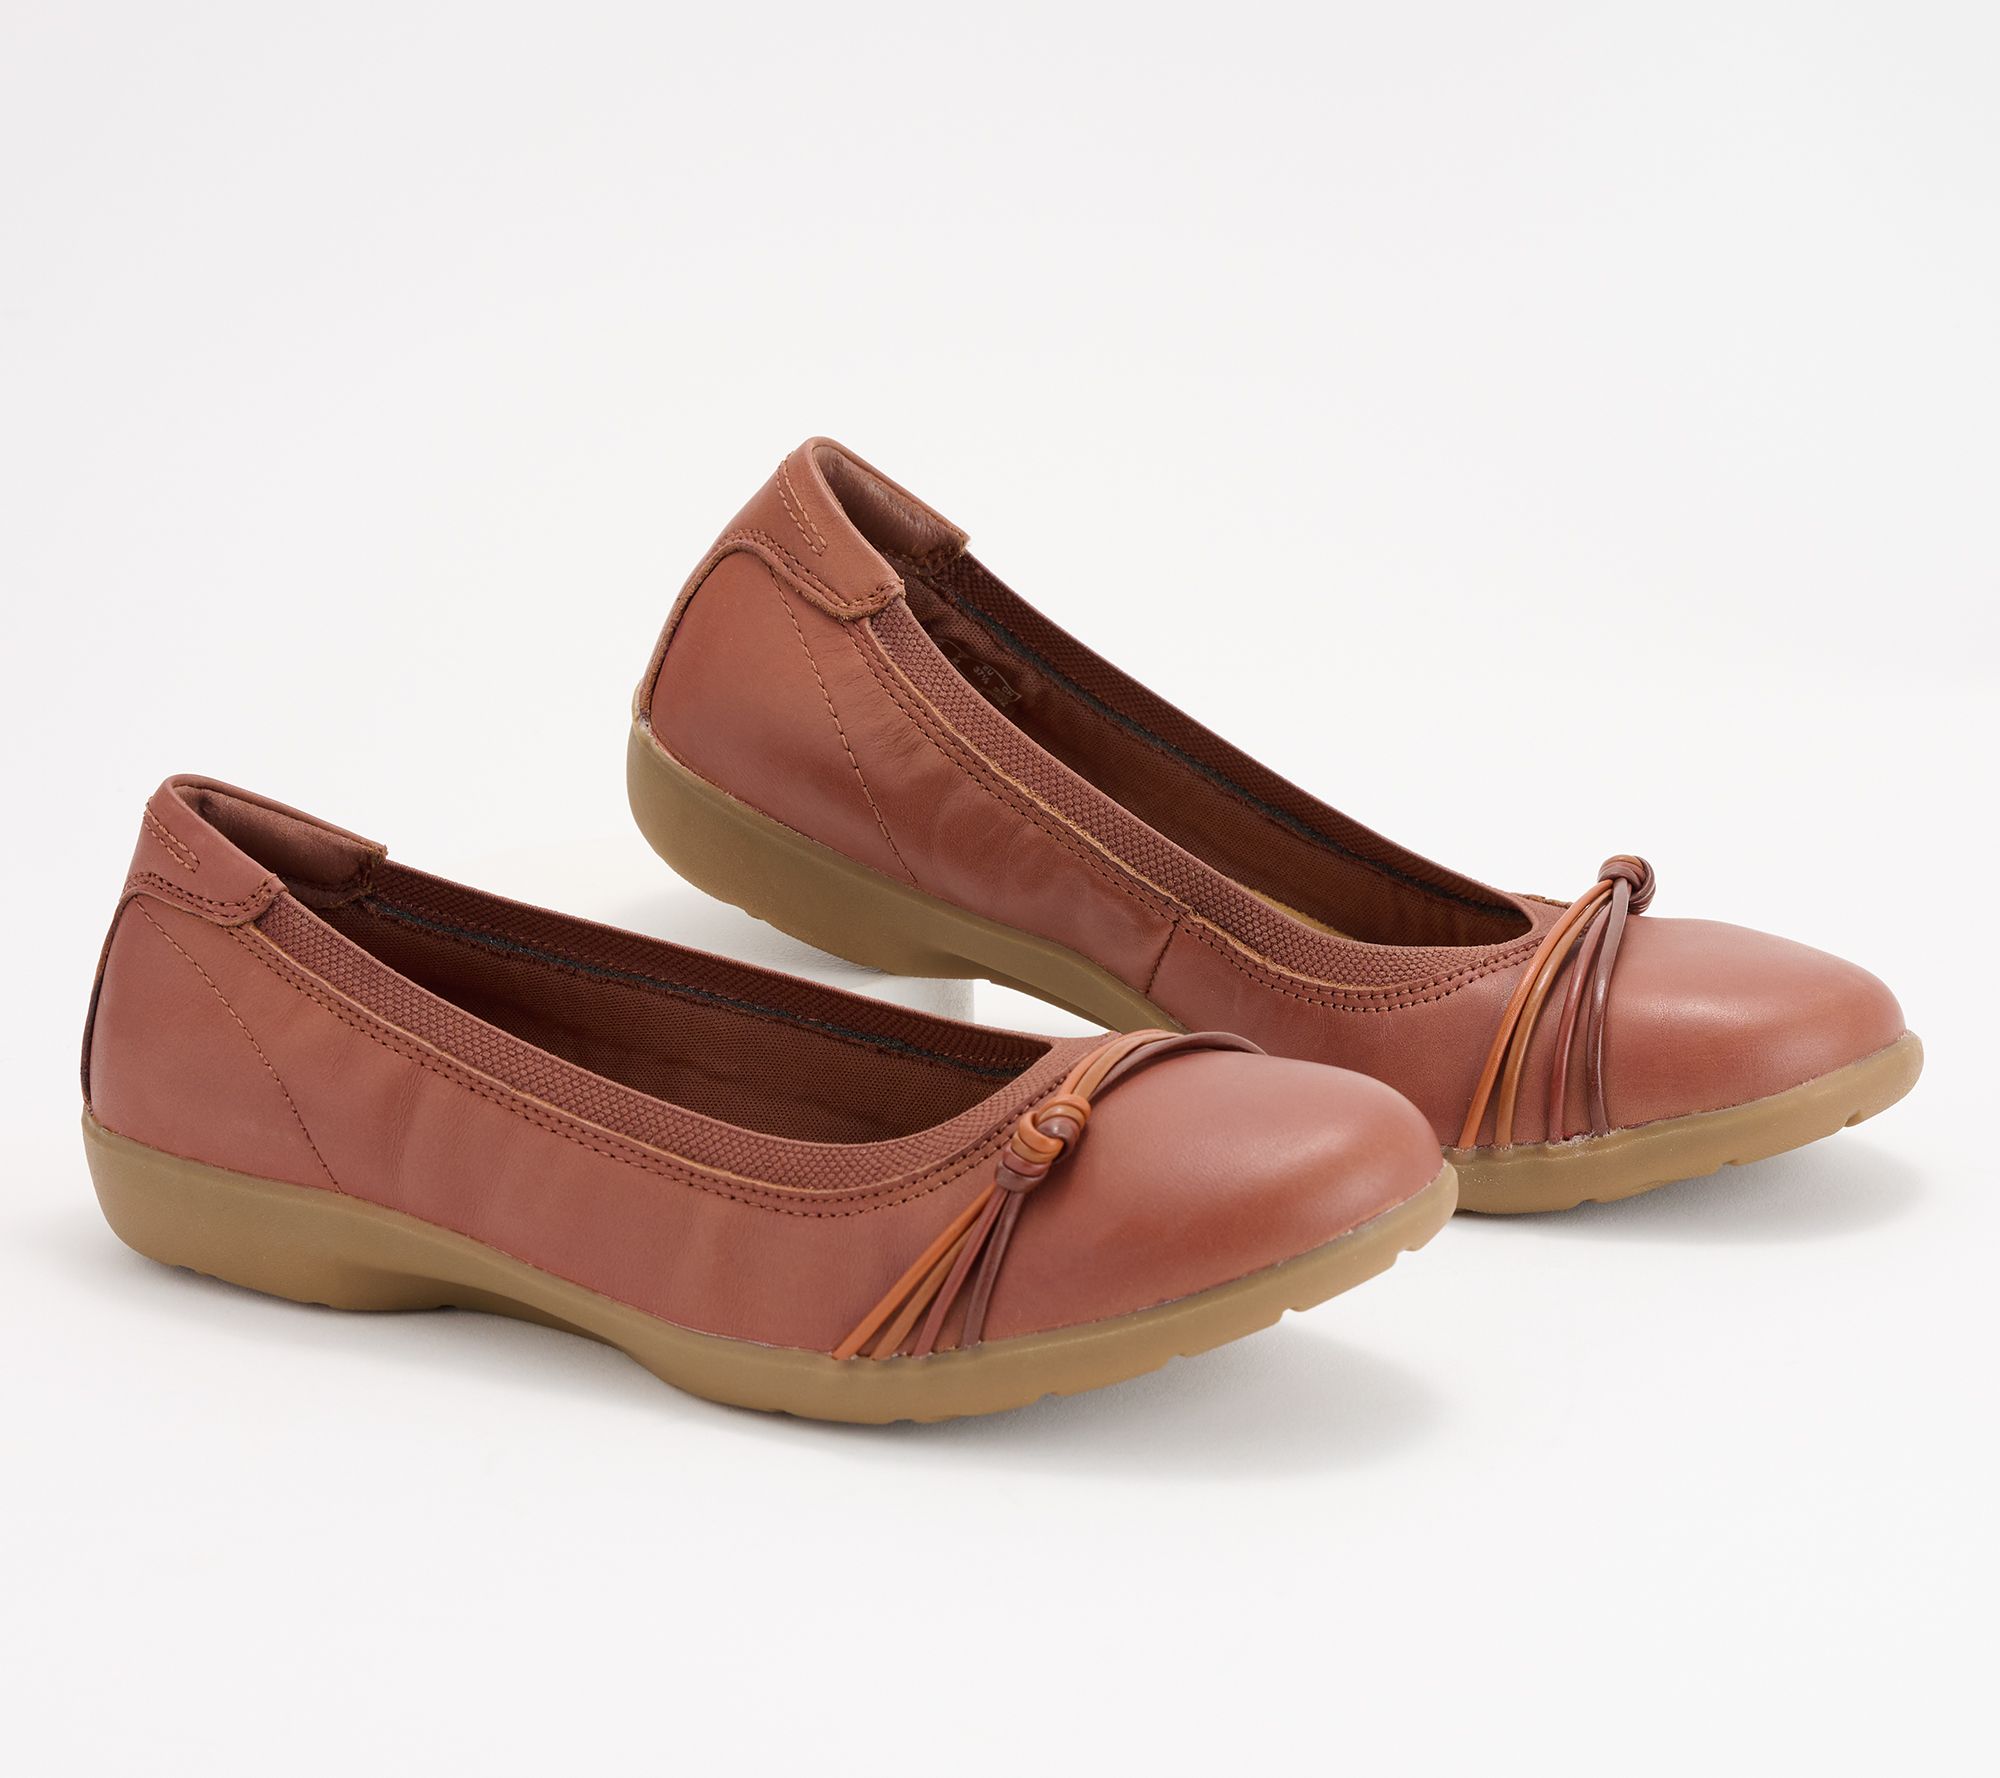 Clarks Leather Ballet Flats - Meadow Rae -